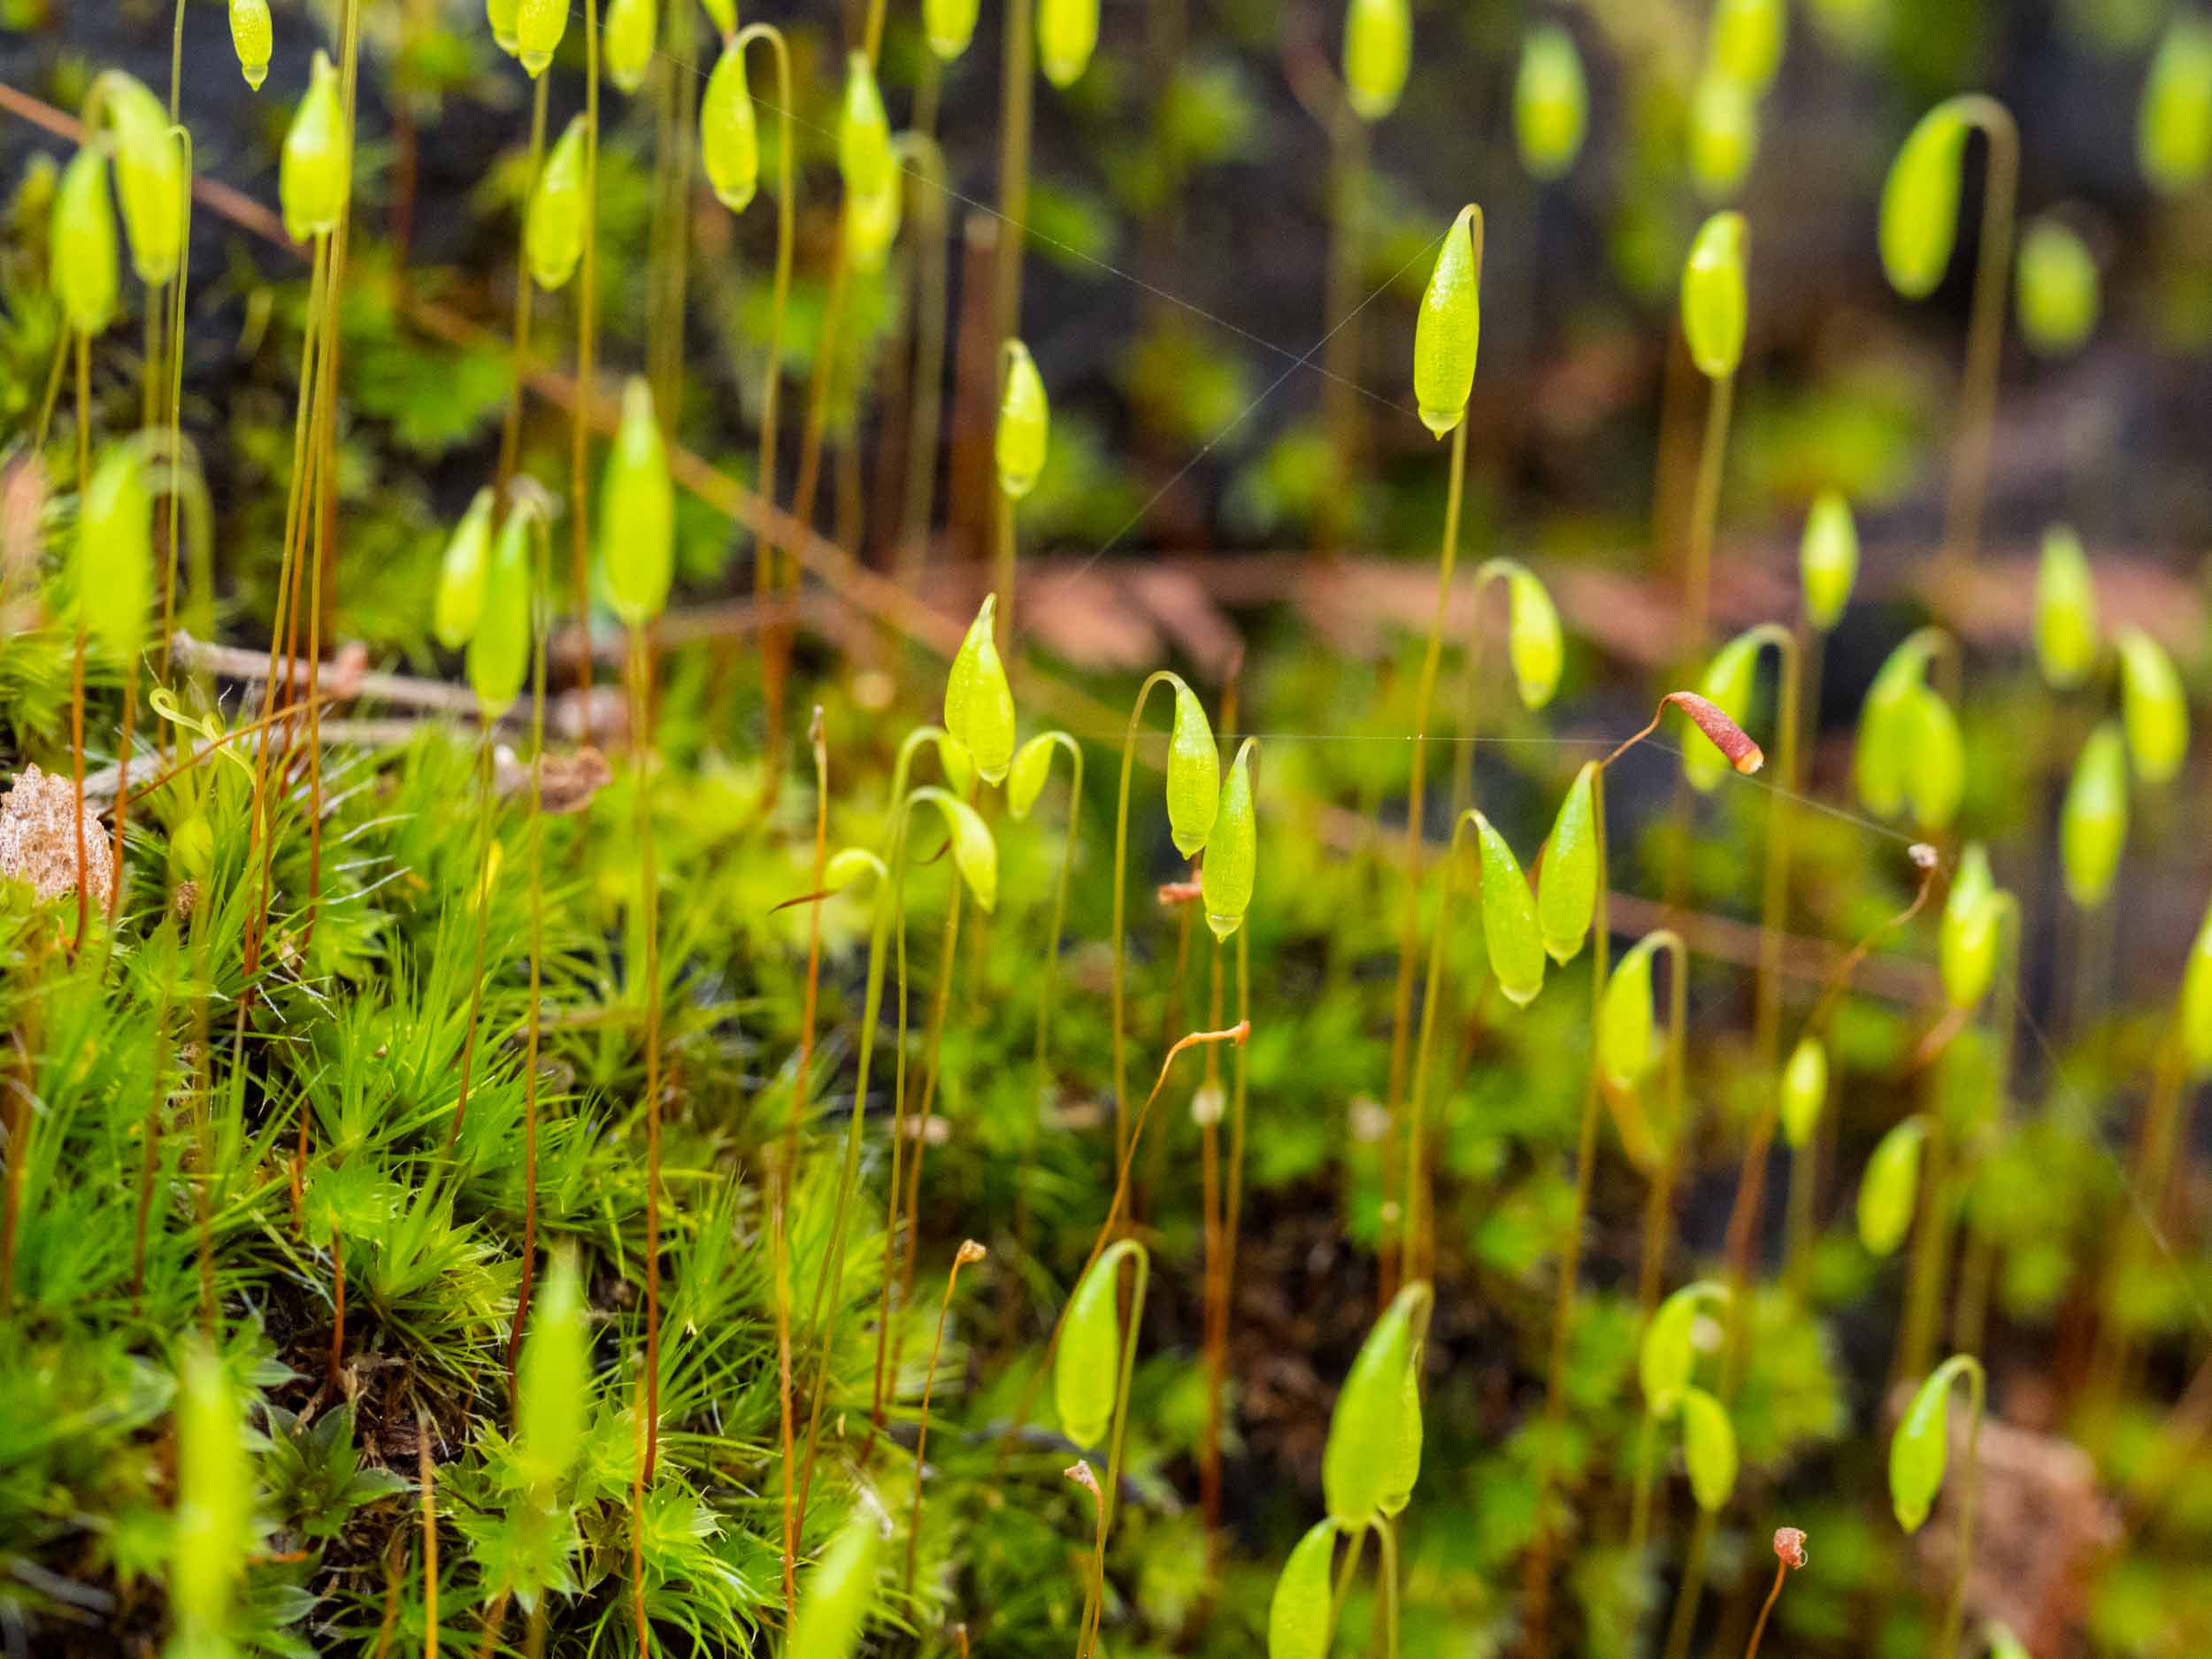  The moss  Rosulabryum capillare  is found on most of our rotting logs. Spores develop in the capsules at the top of the vertical sporophytes. 